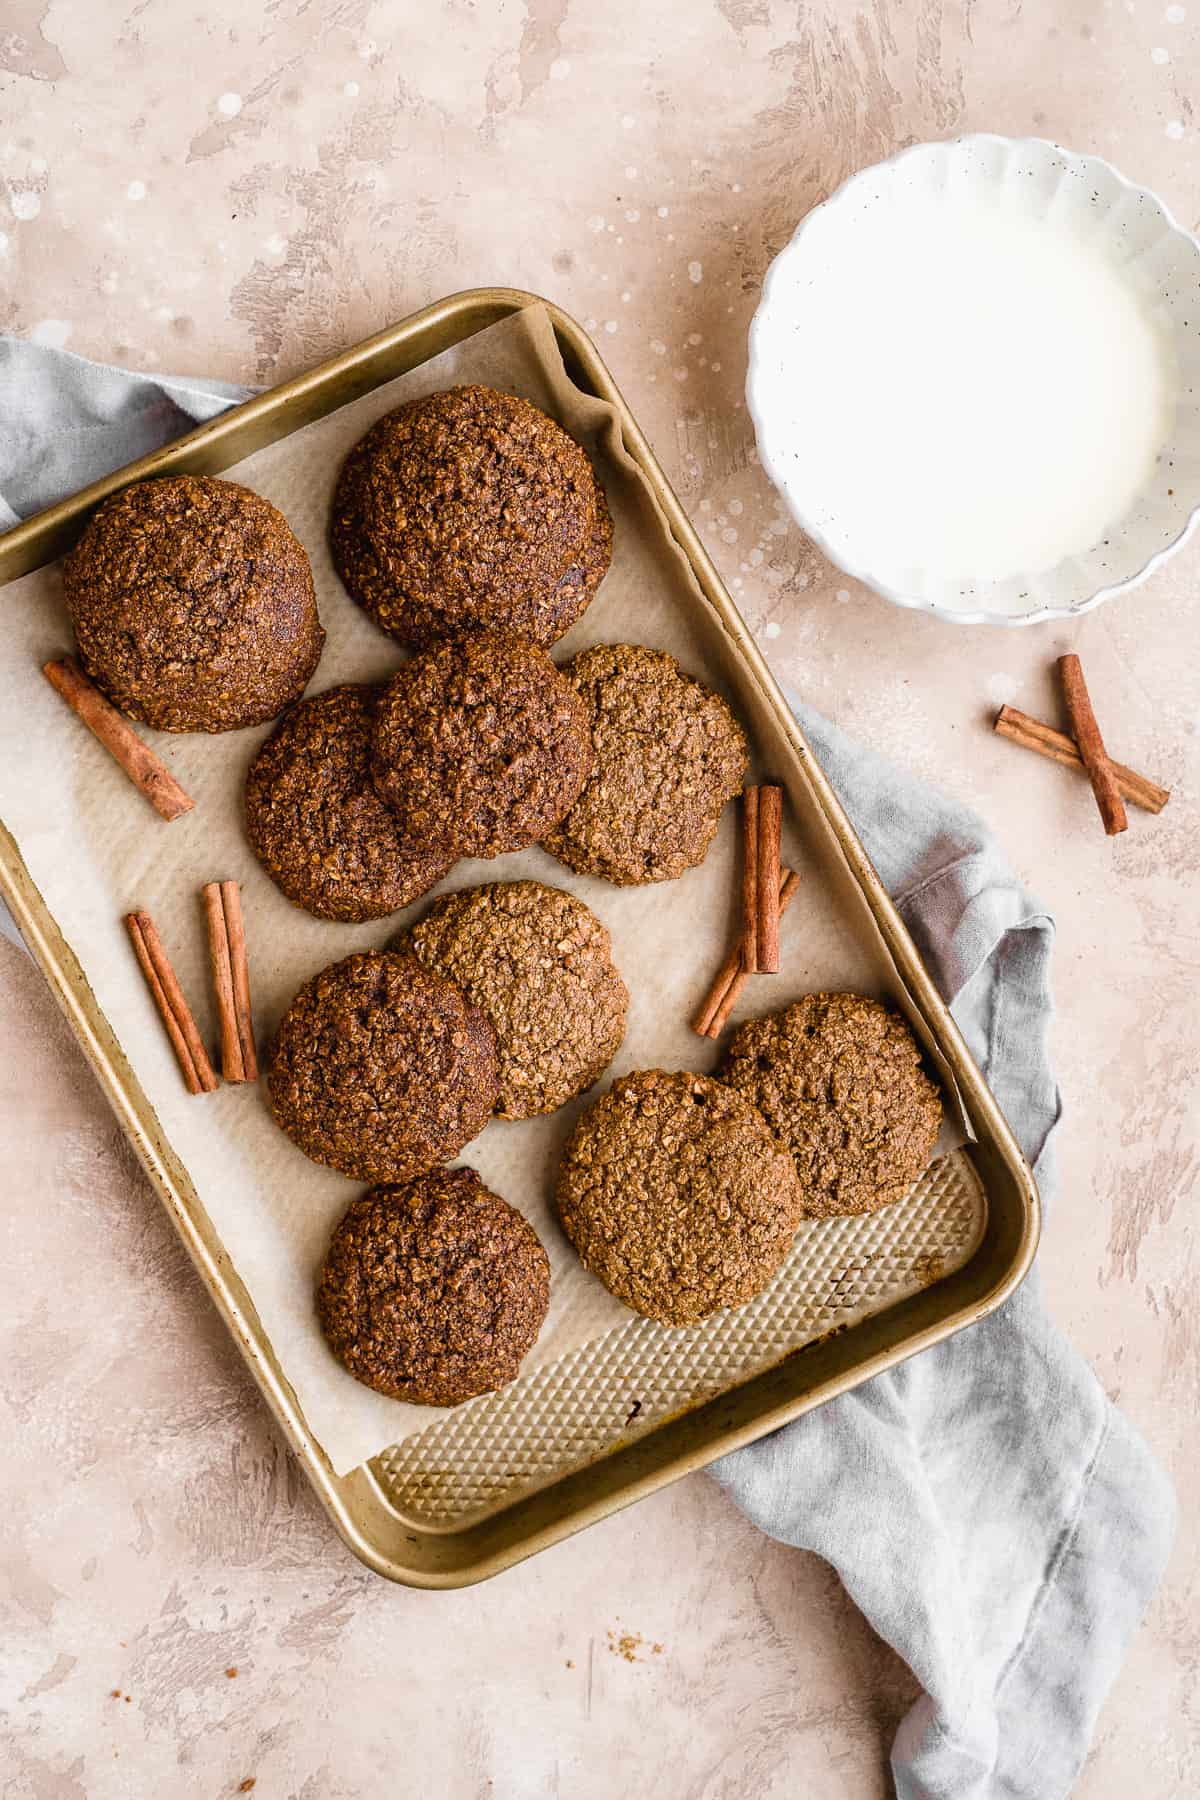 Gold baking sheet with oatmeal gingerbread cookies fresh out of the oven waiting to be dipped into the white chocolate mix.  White scalloped bowl of melted chocolate sits nearby.  Cinnamon sticks are scattered around.   